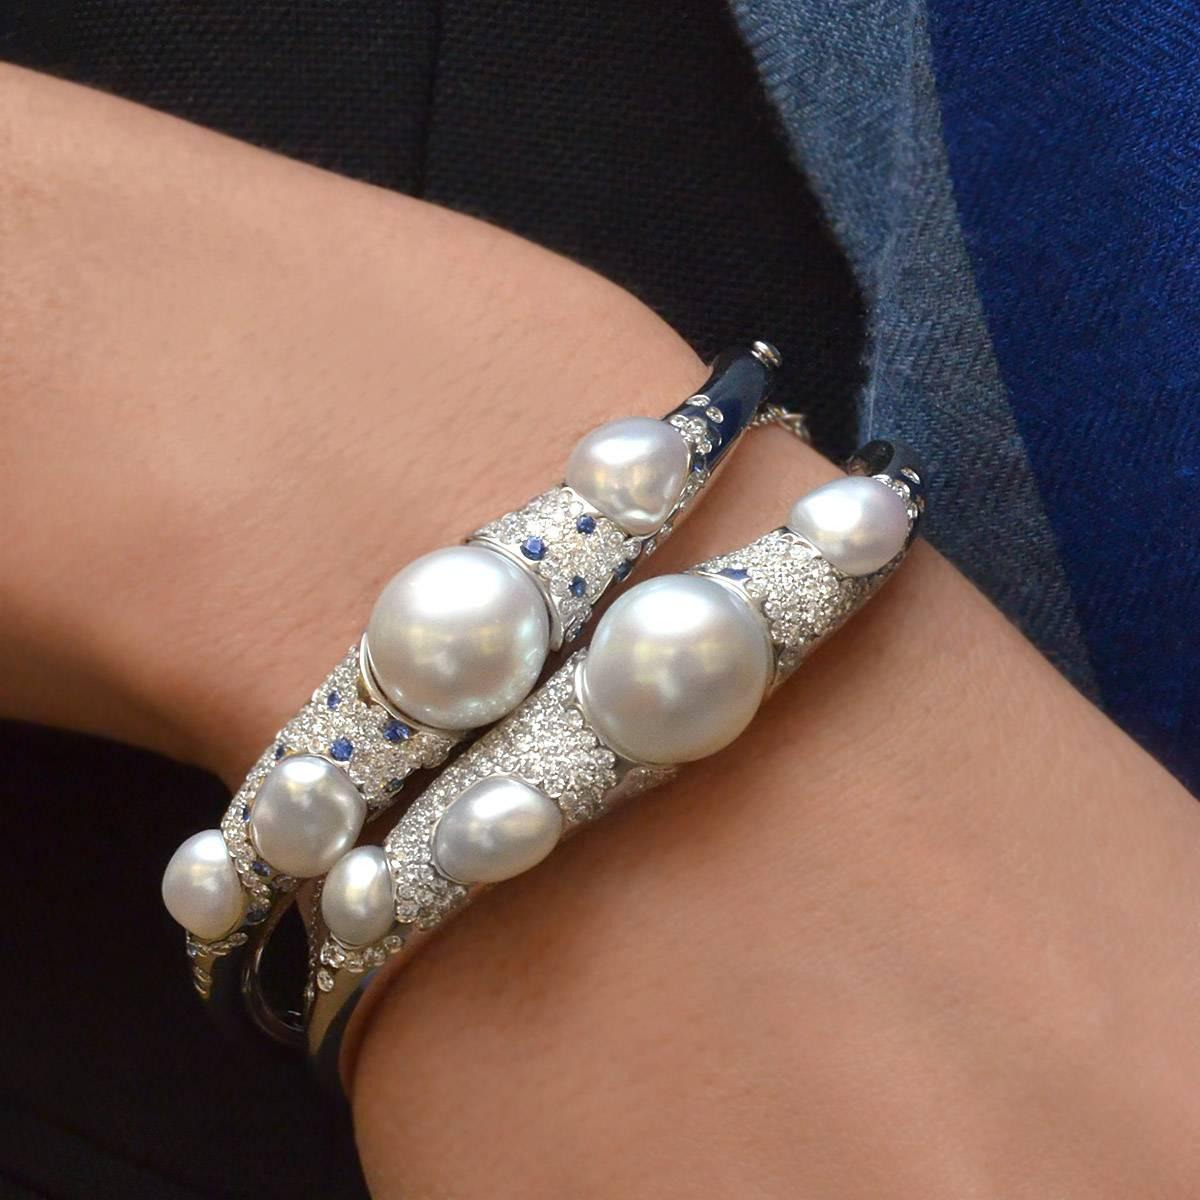 Autore South Sea pearls are one of nature’s greatest gifts. Born in the intense blue waters of the South Seas, their entrancing luminosity reflects the light of the sun, the glow of the moon and the beauty of the waters that nurture them into